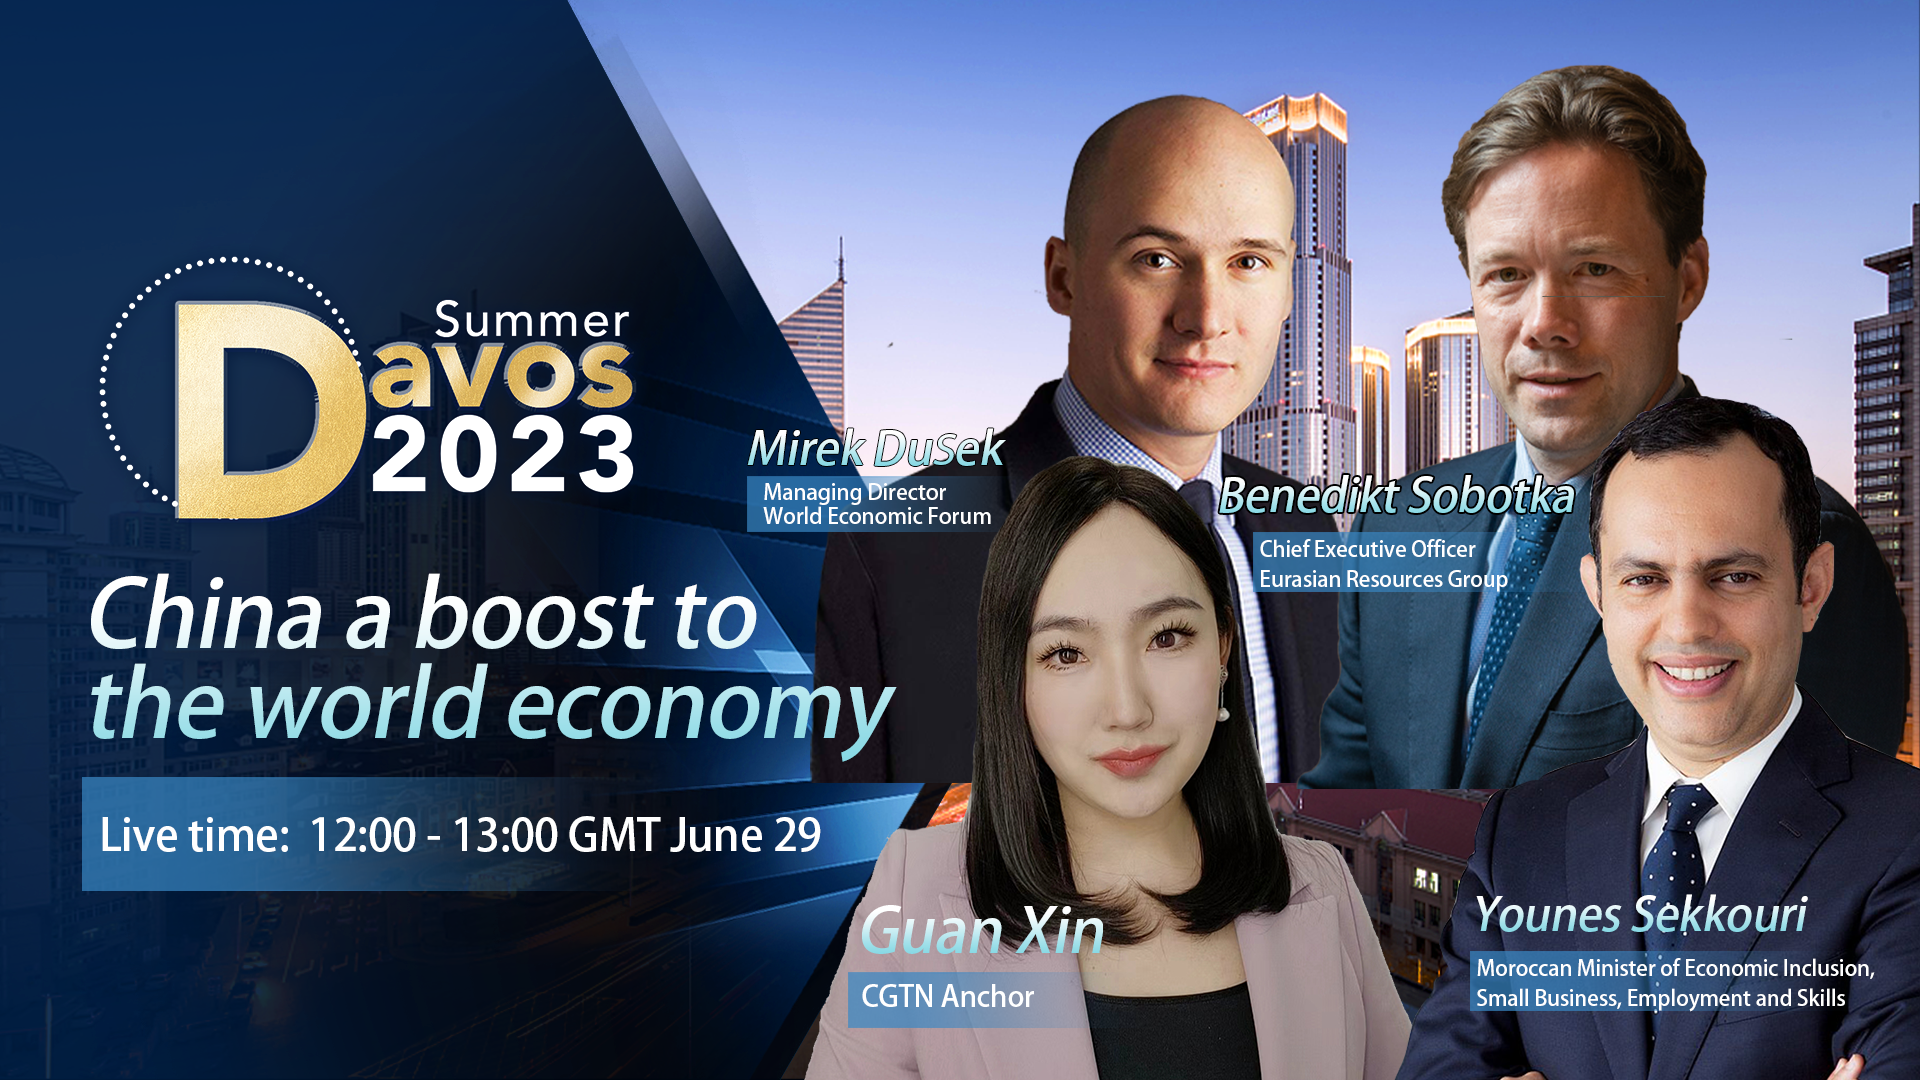 Watch: Summer Davos 2023 - China, a boost to the world economy